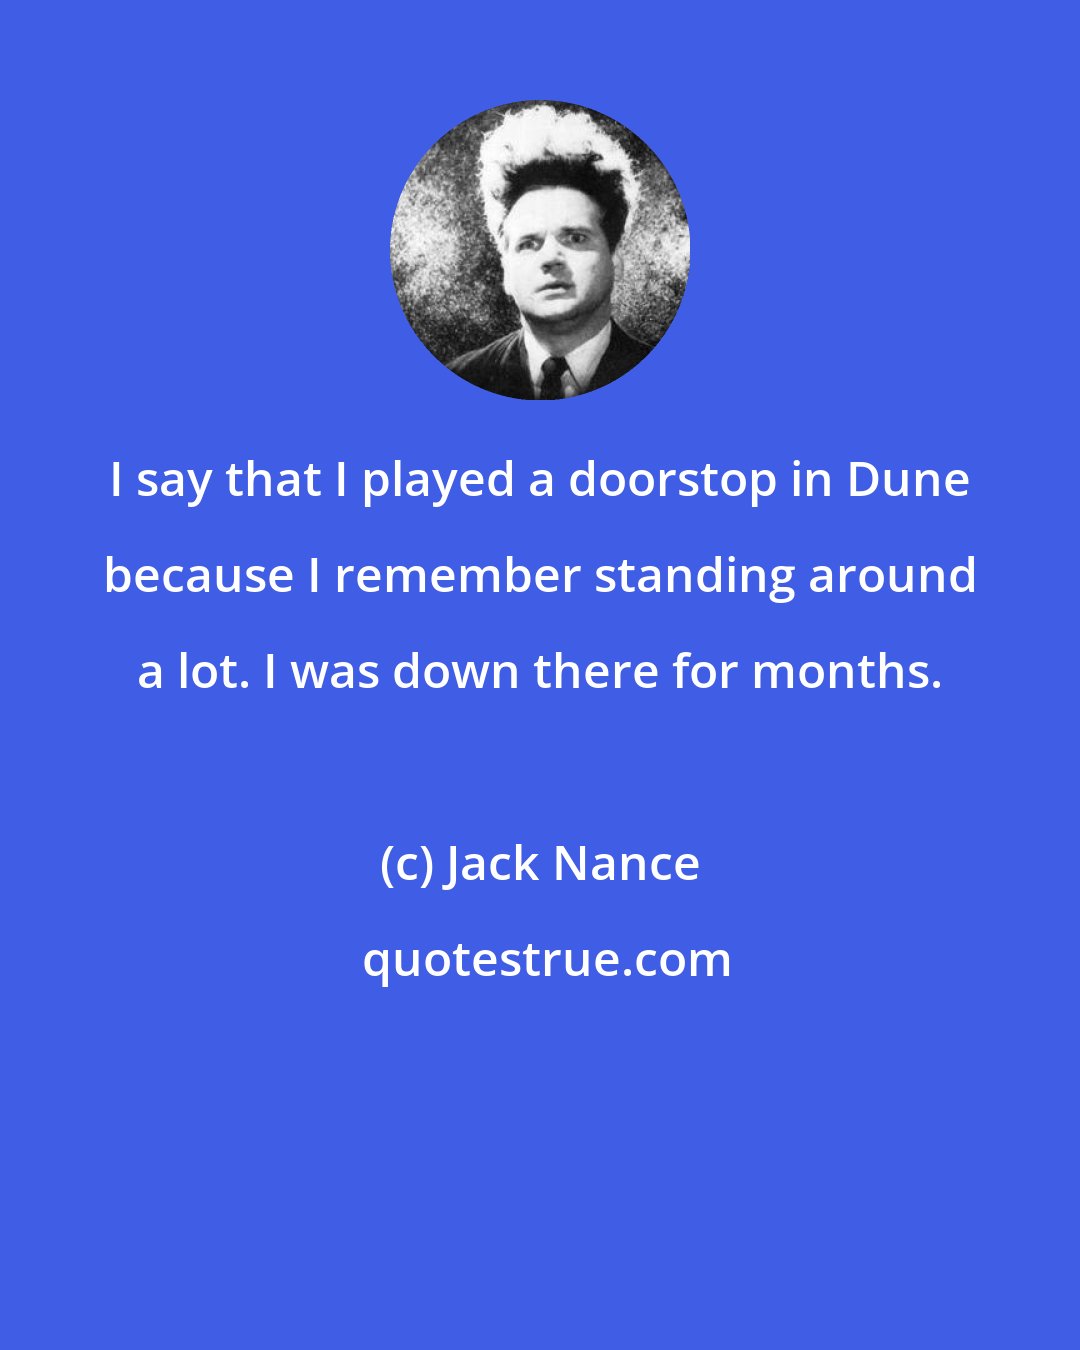 Jack Nance: I say that I played a doorstop in Dune because I remember standing around a lot. I was down there for months.